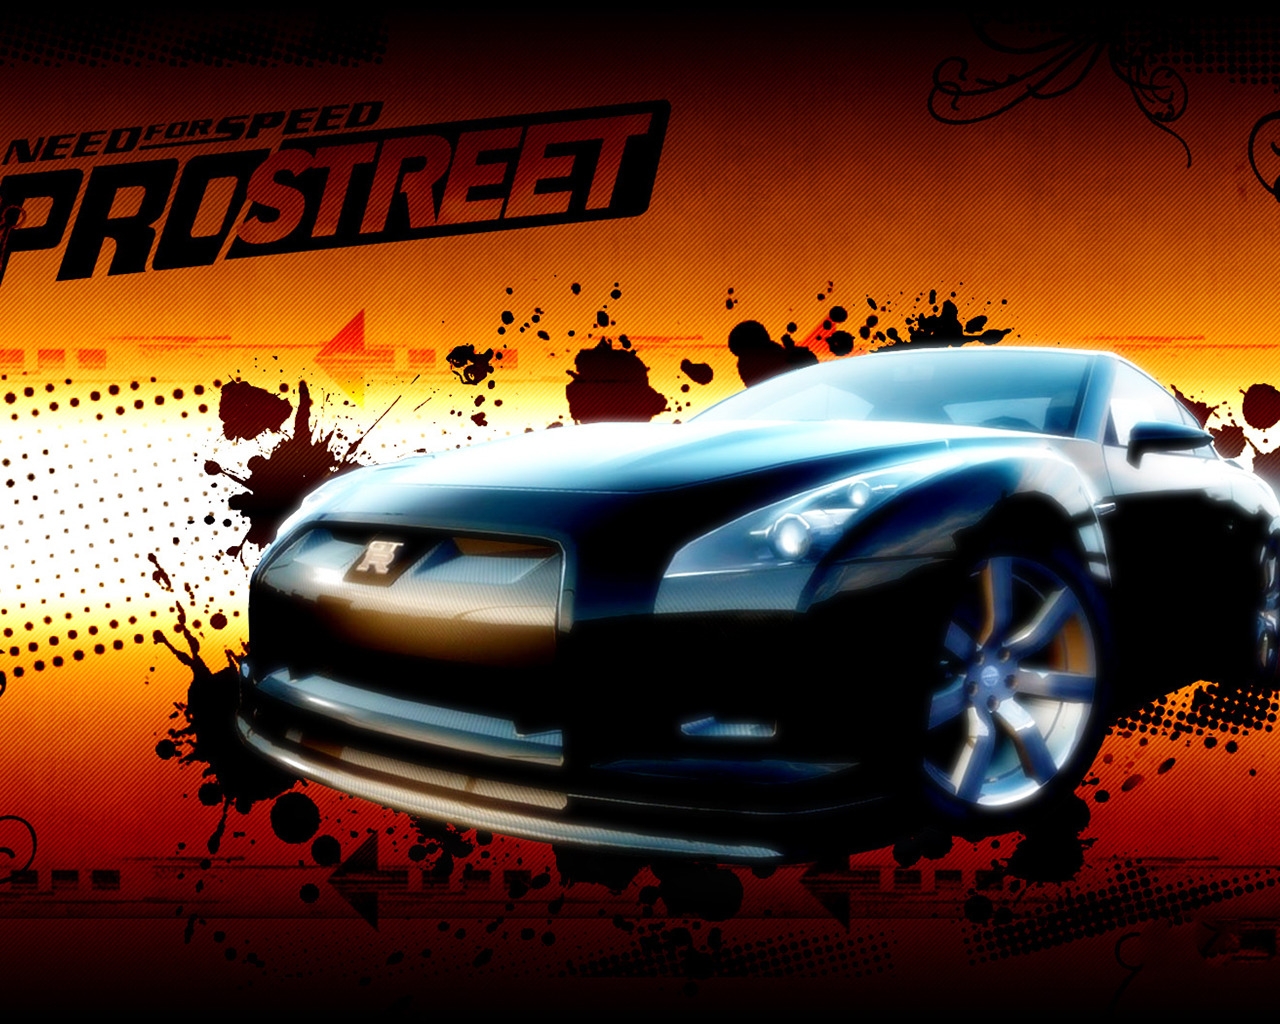 NFS Pro Street for 1280 x 1024 resolution